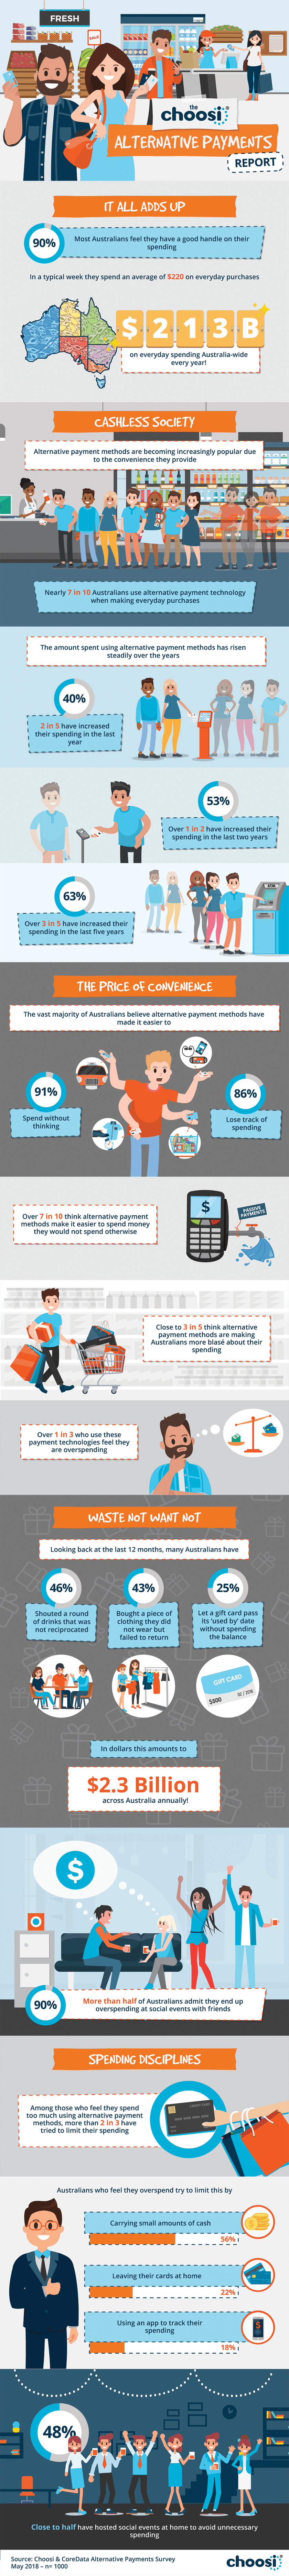 The Choosi Alternative Payments Report infographic